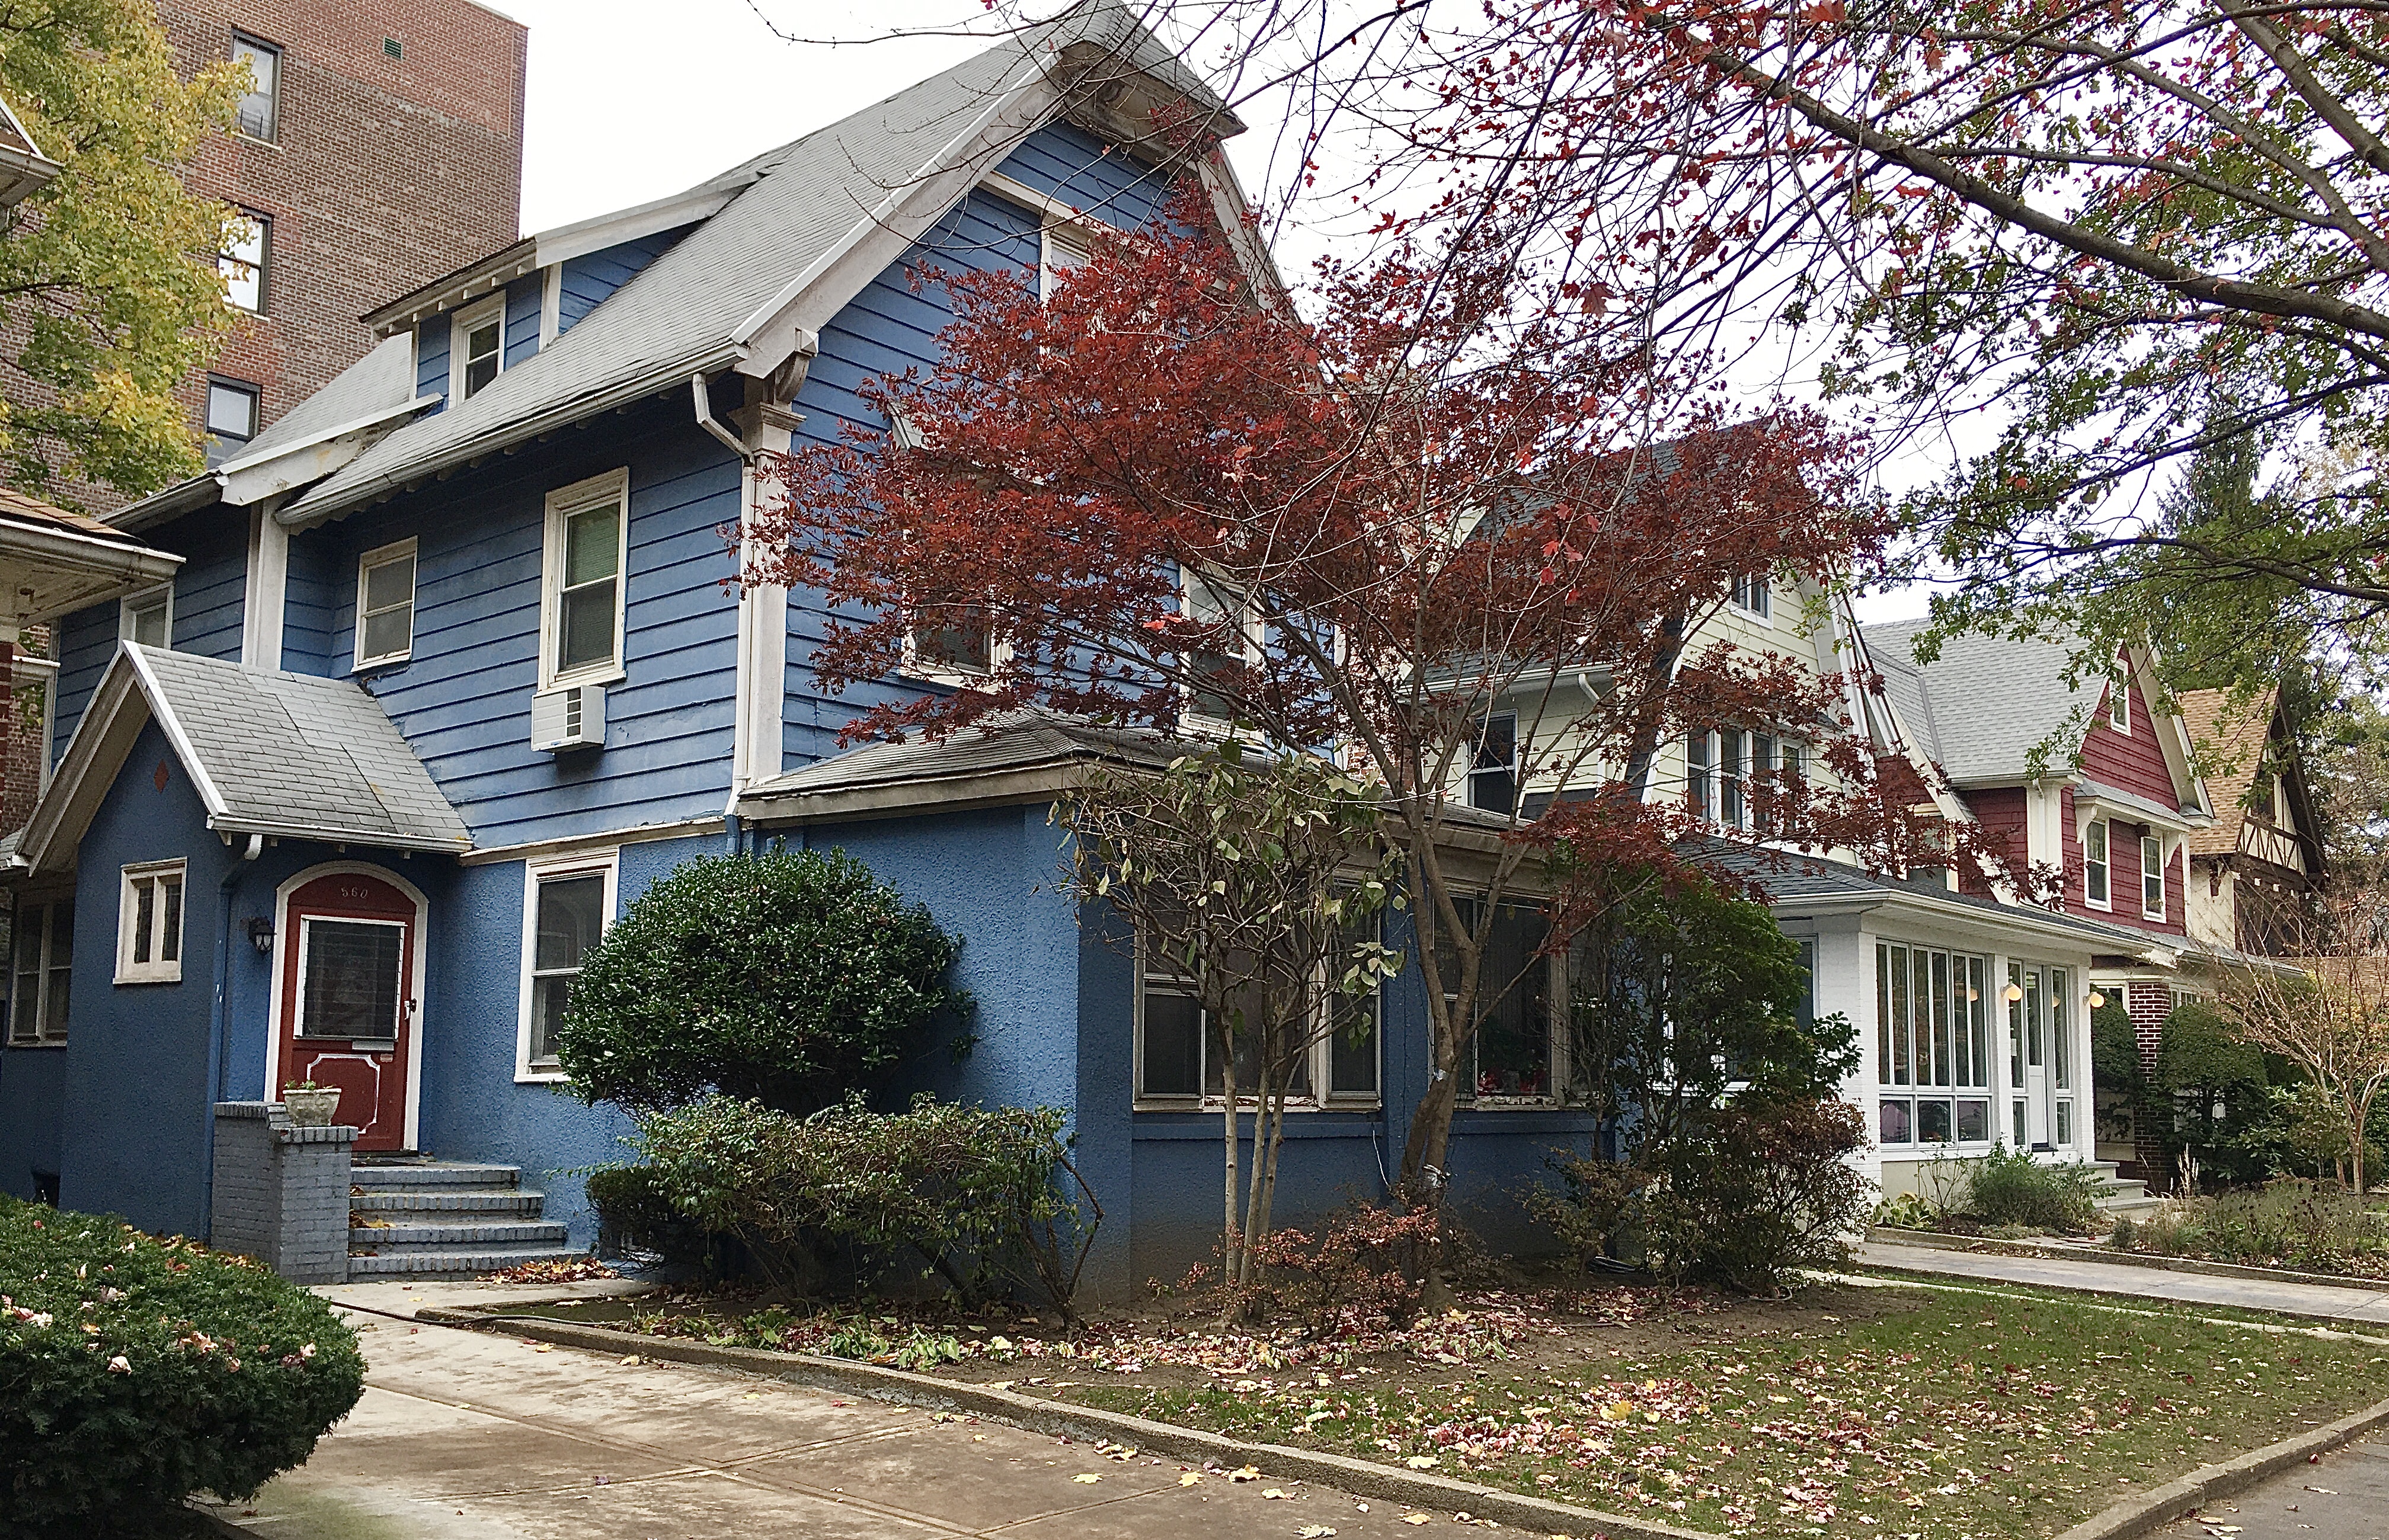 These Westminster Road houses are located in Ditmas Park West. Photo: Lore Croghan/Brooklyn Eagle